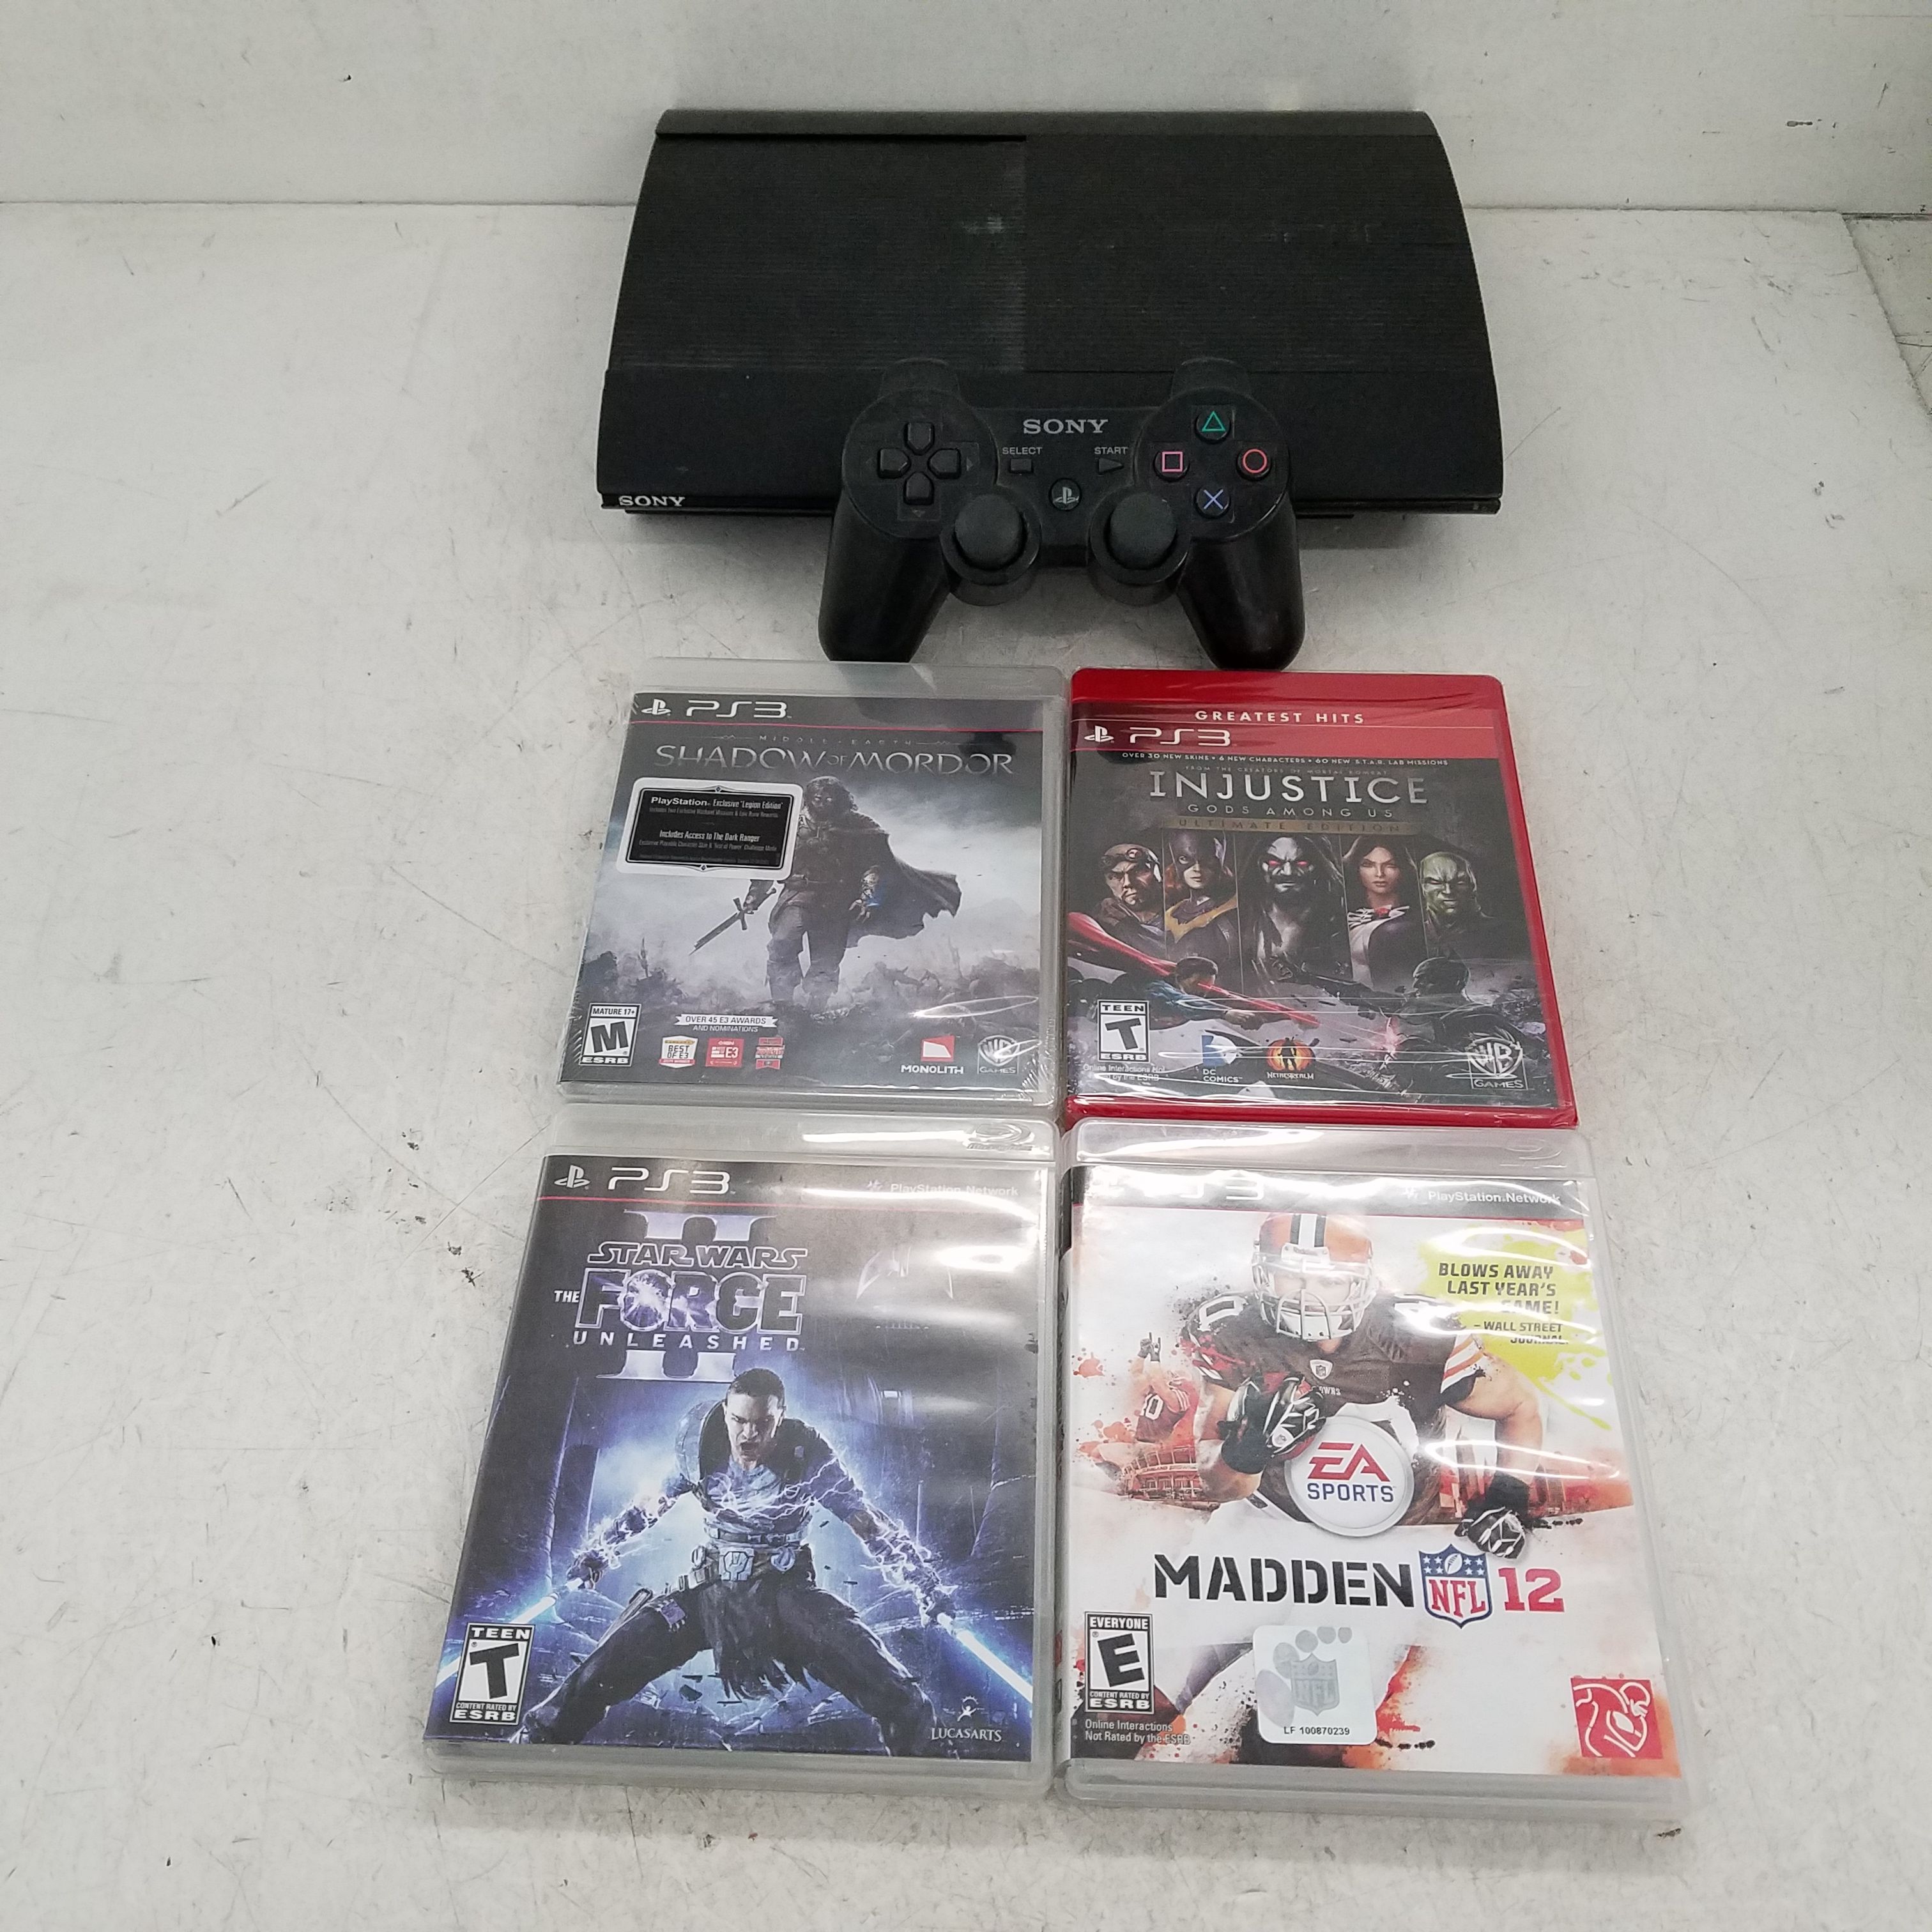 Best Buy: Sony PlayStation 3 (250GB) inFAMOUS Collection Limited Edition  Bundle 99034